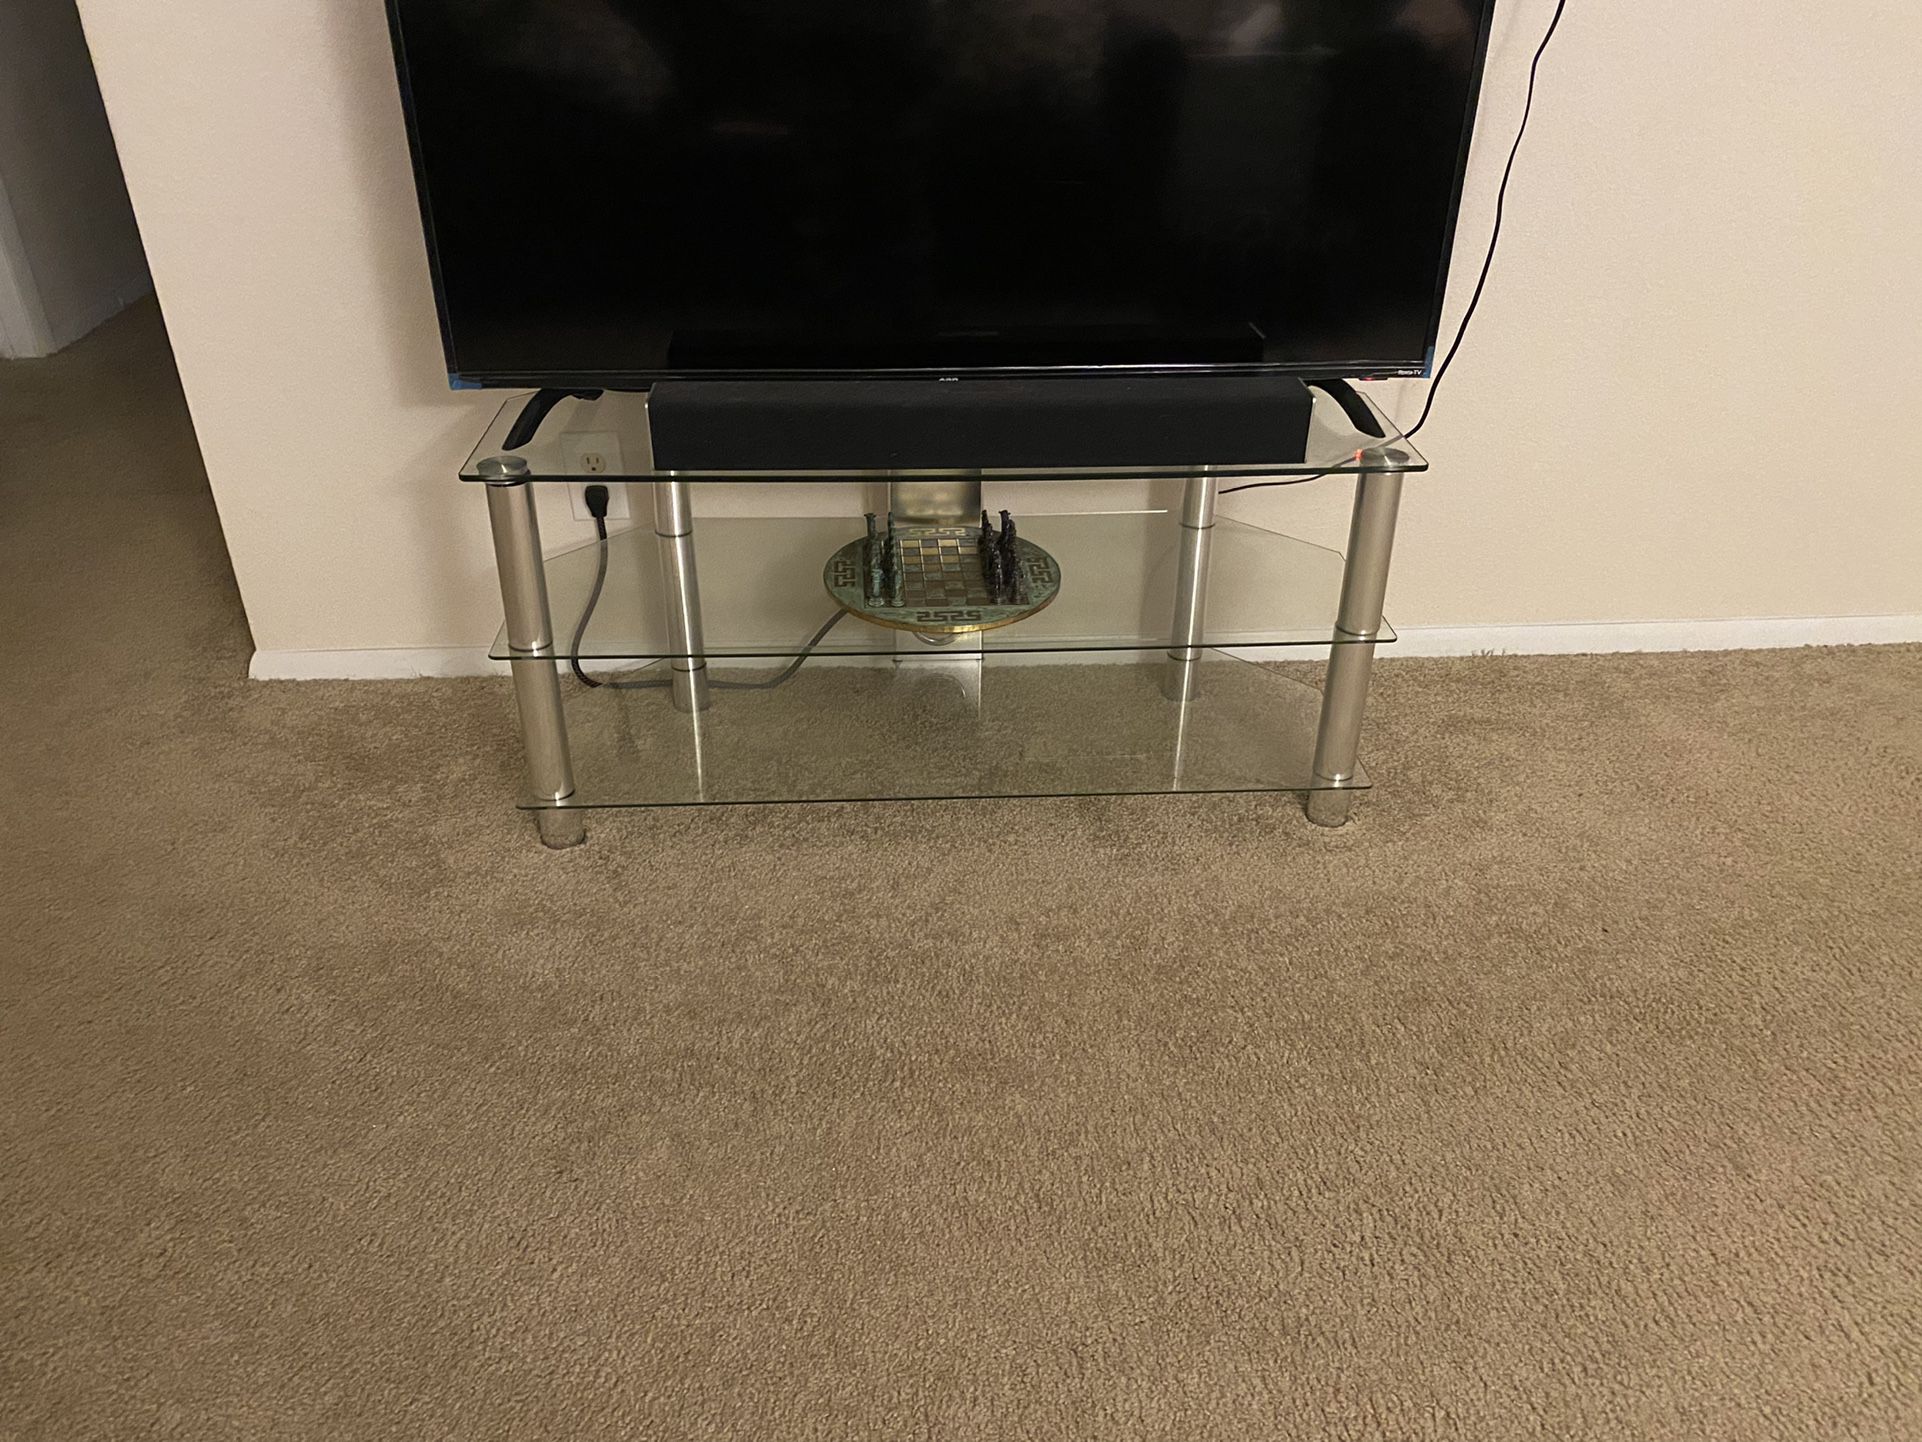 Entertainment Stand 